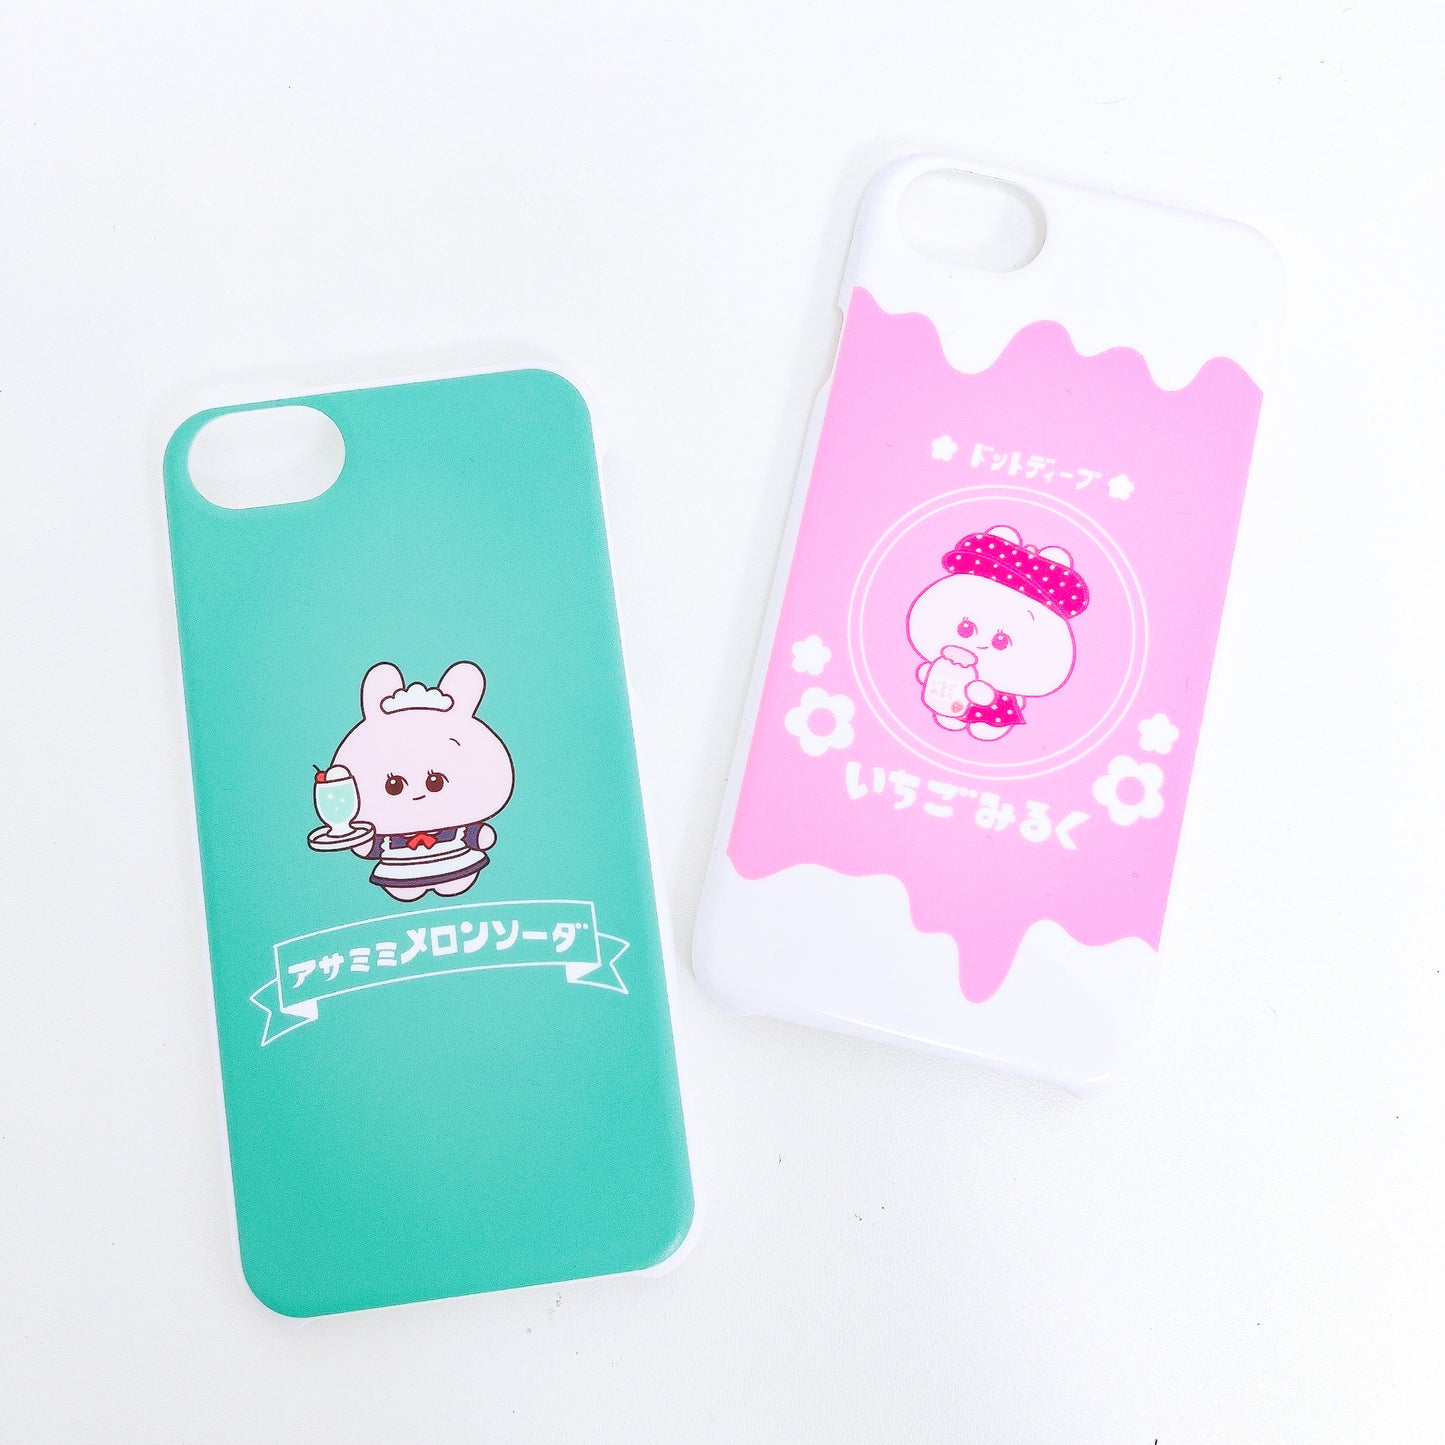 [Asamimi-chan] Smartphone case compatible with almost all models (melon soda) Rakuten Mobile series [Made to order]